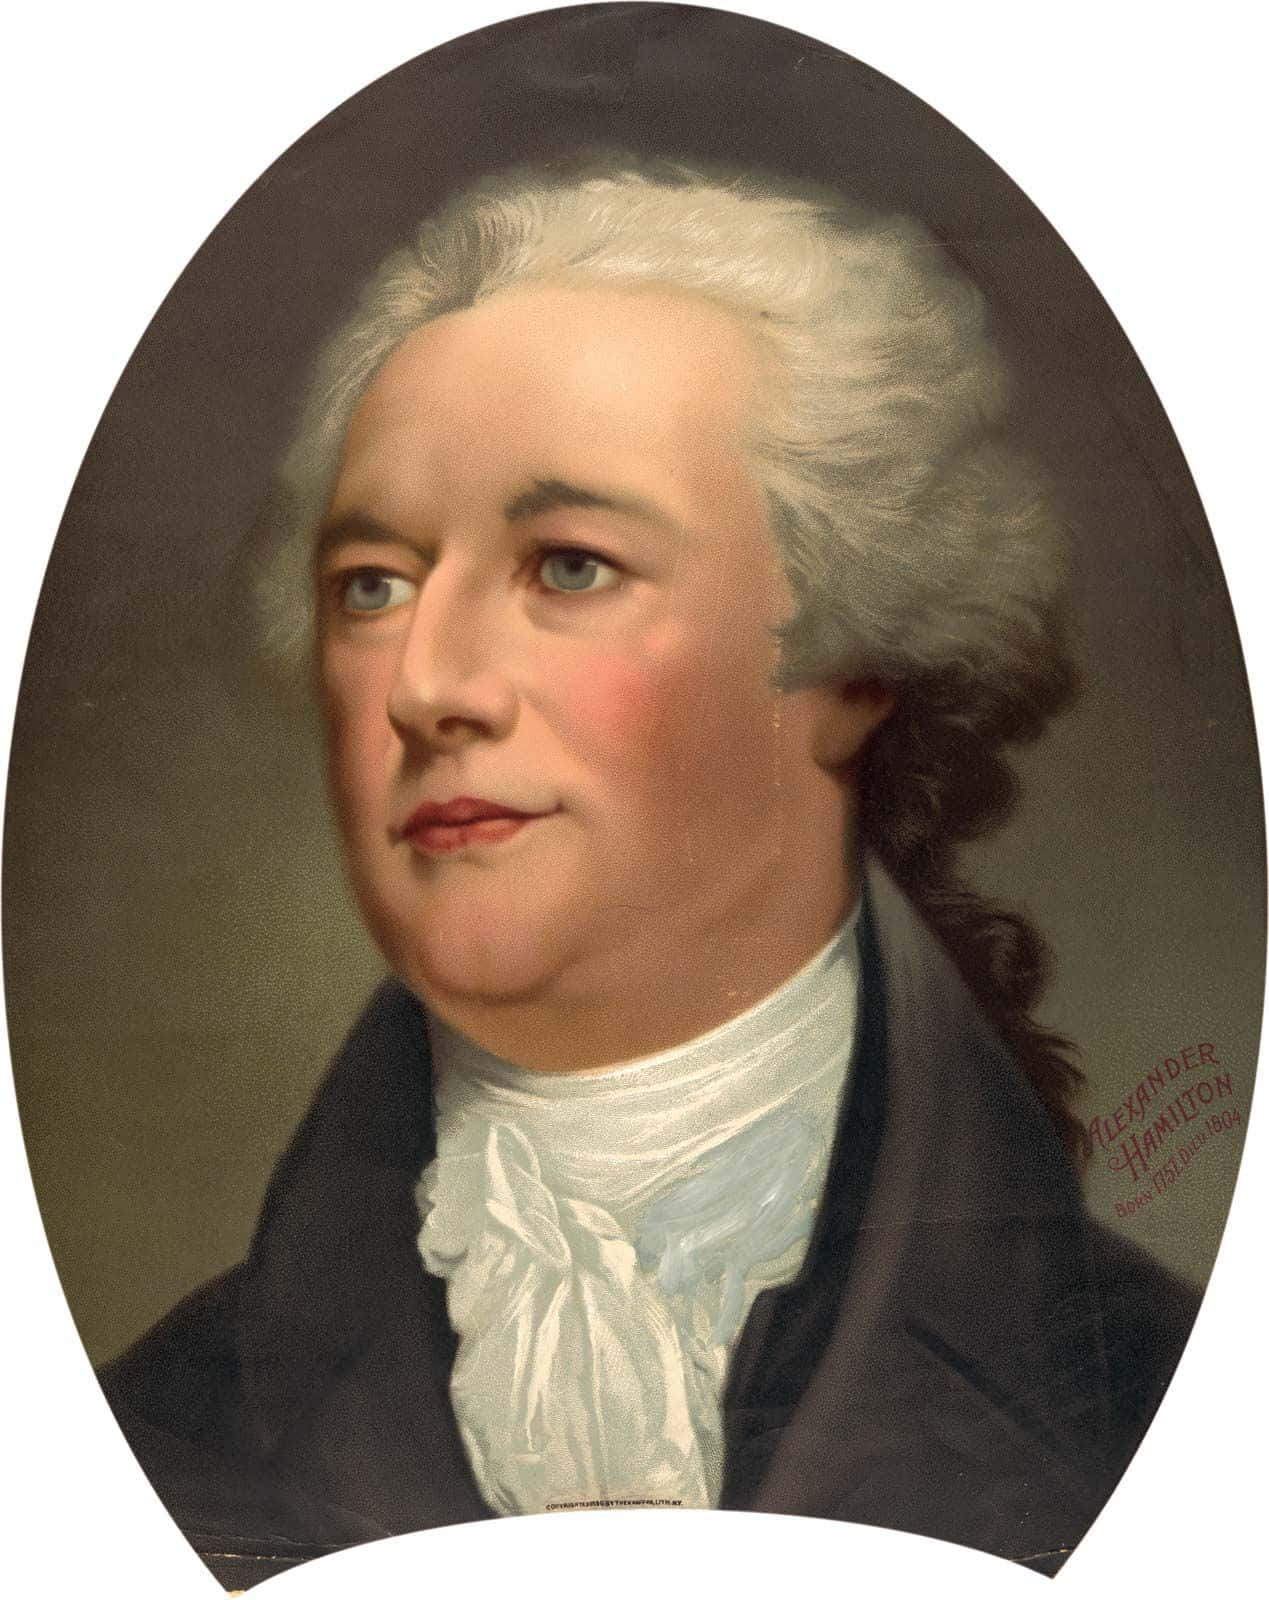 A Painting Of A Man With White Hair